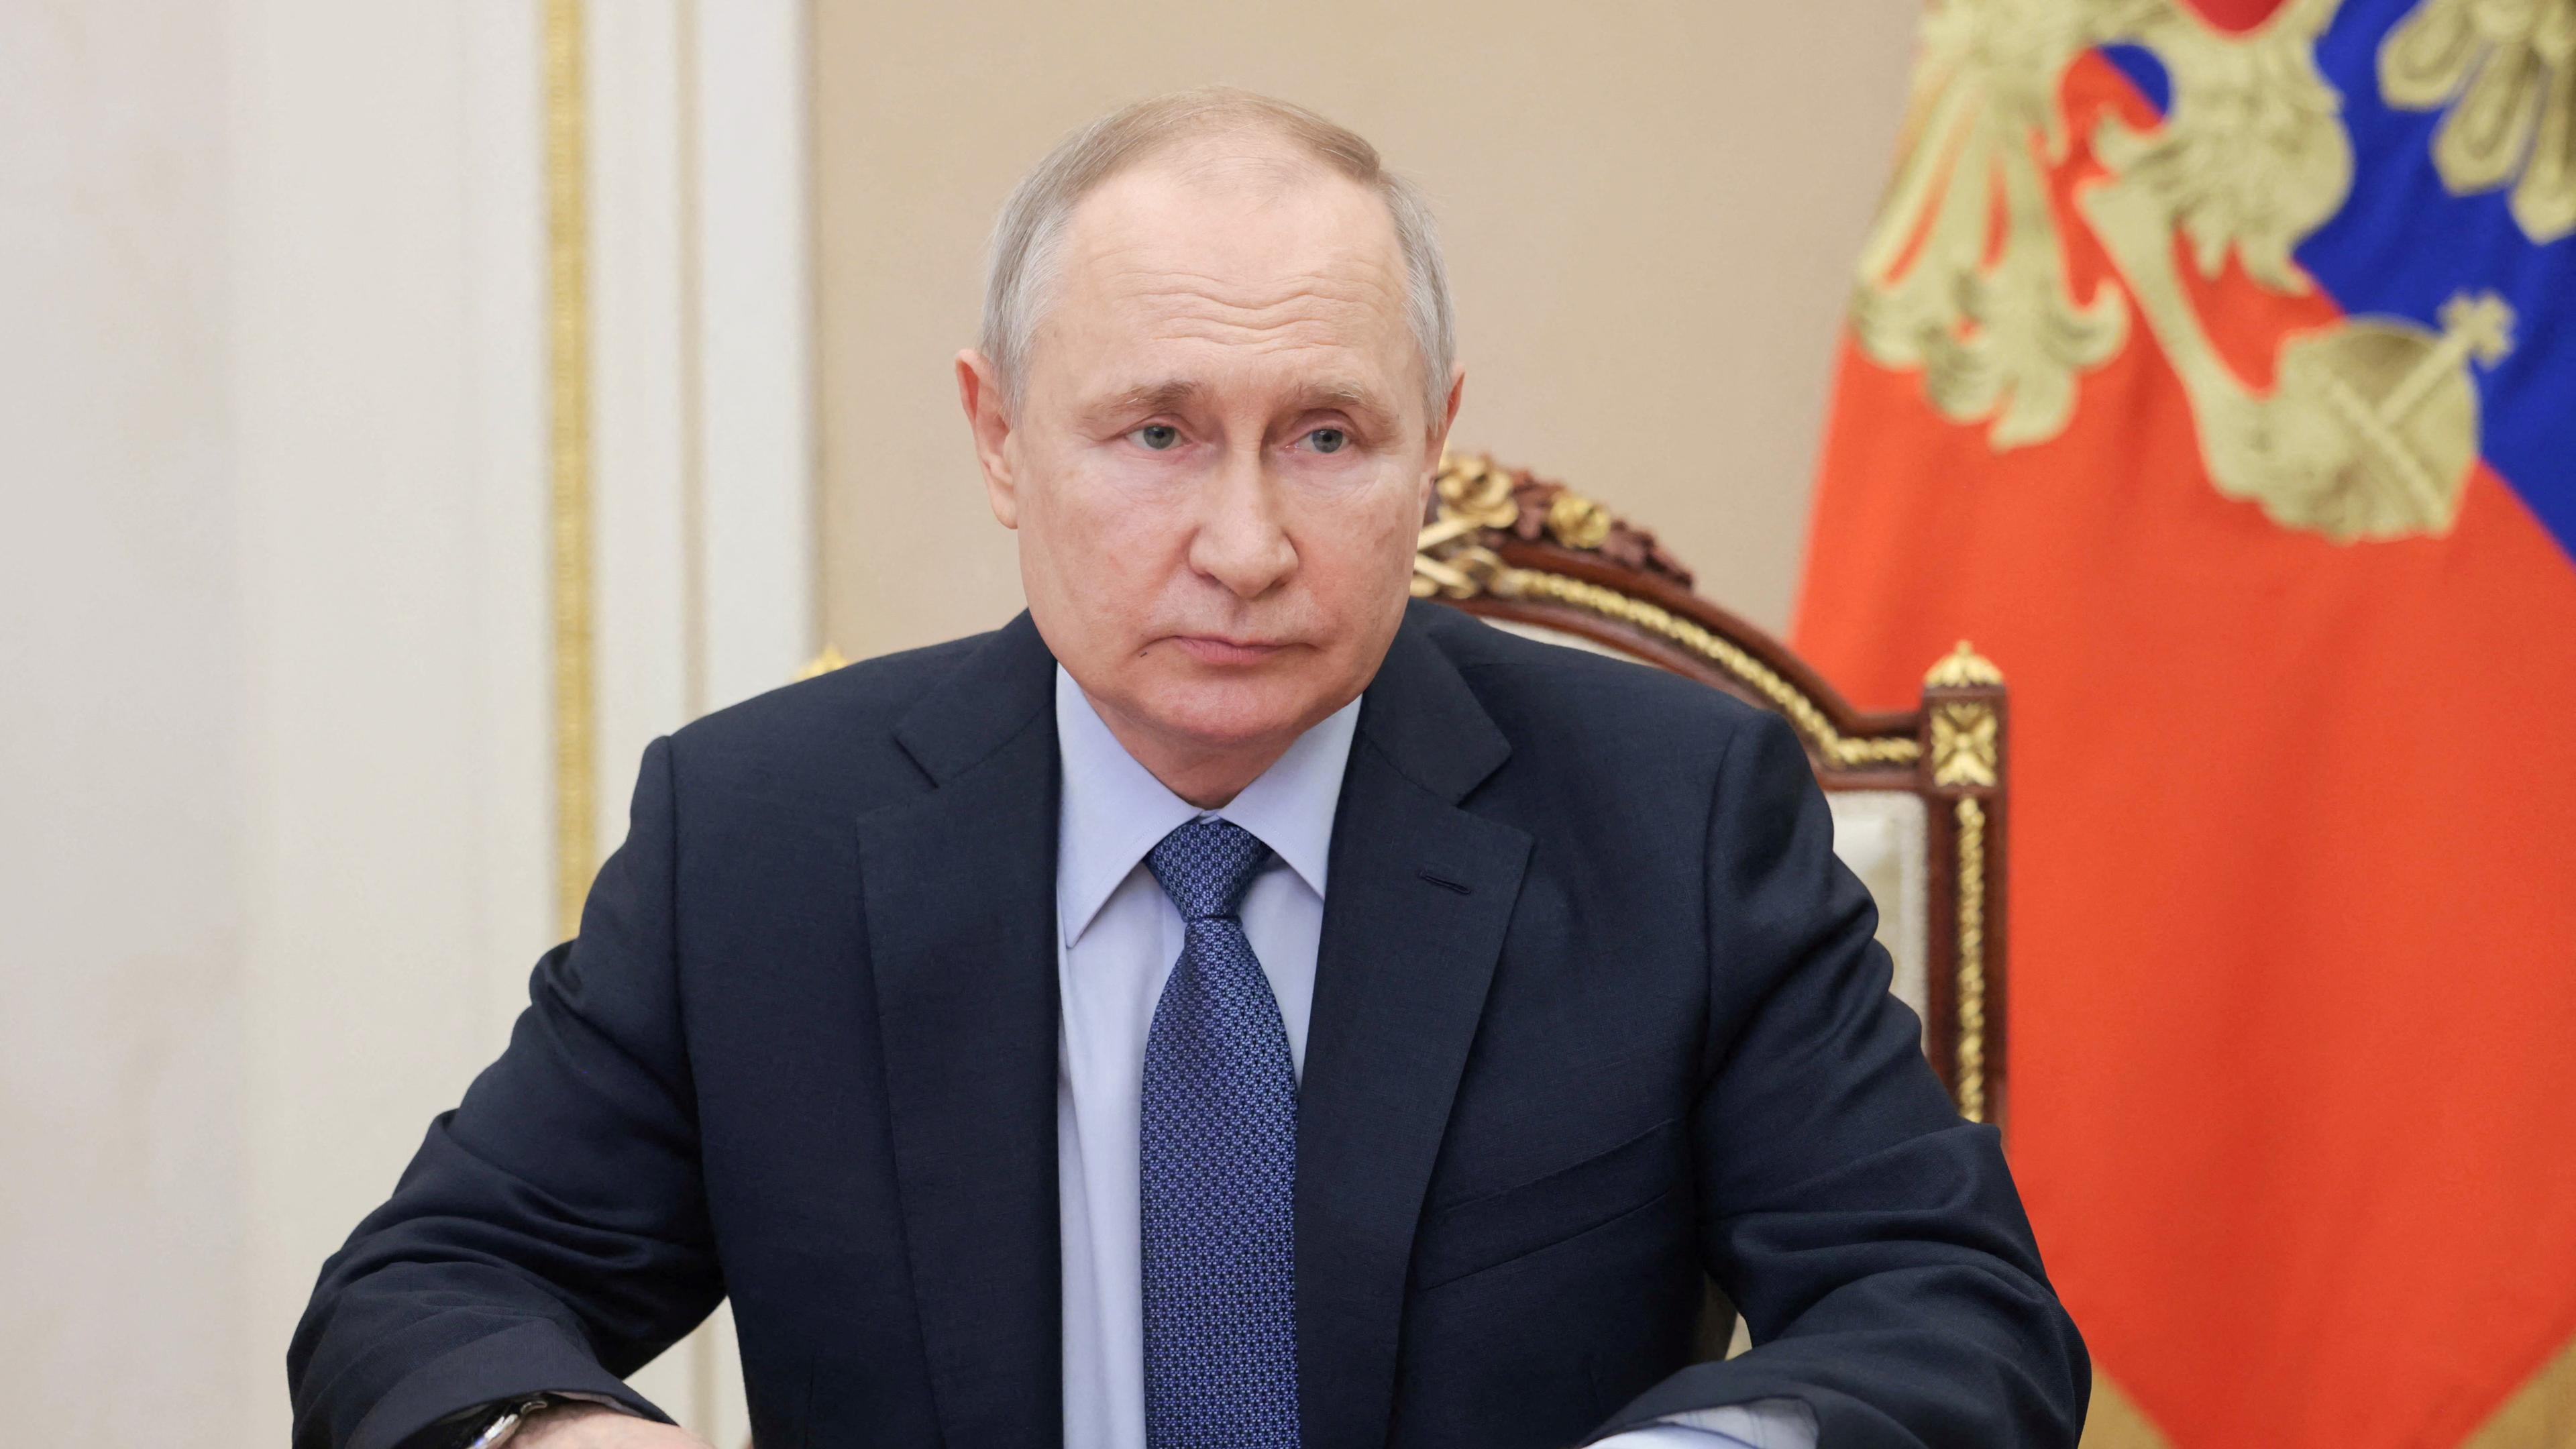 Moscow, March 17, 2023: Russian President Vladimir Putin sits at his desk during a video conference.